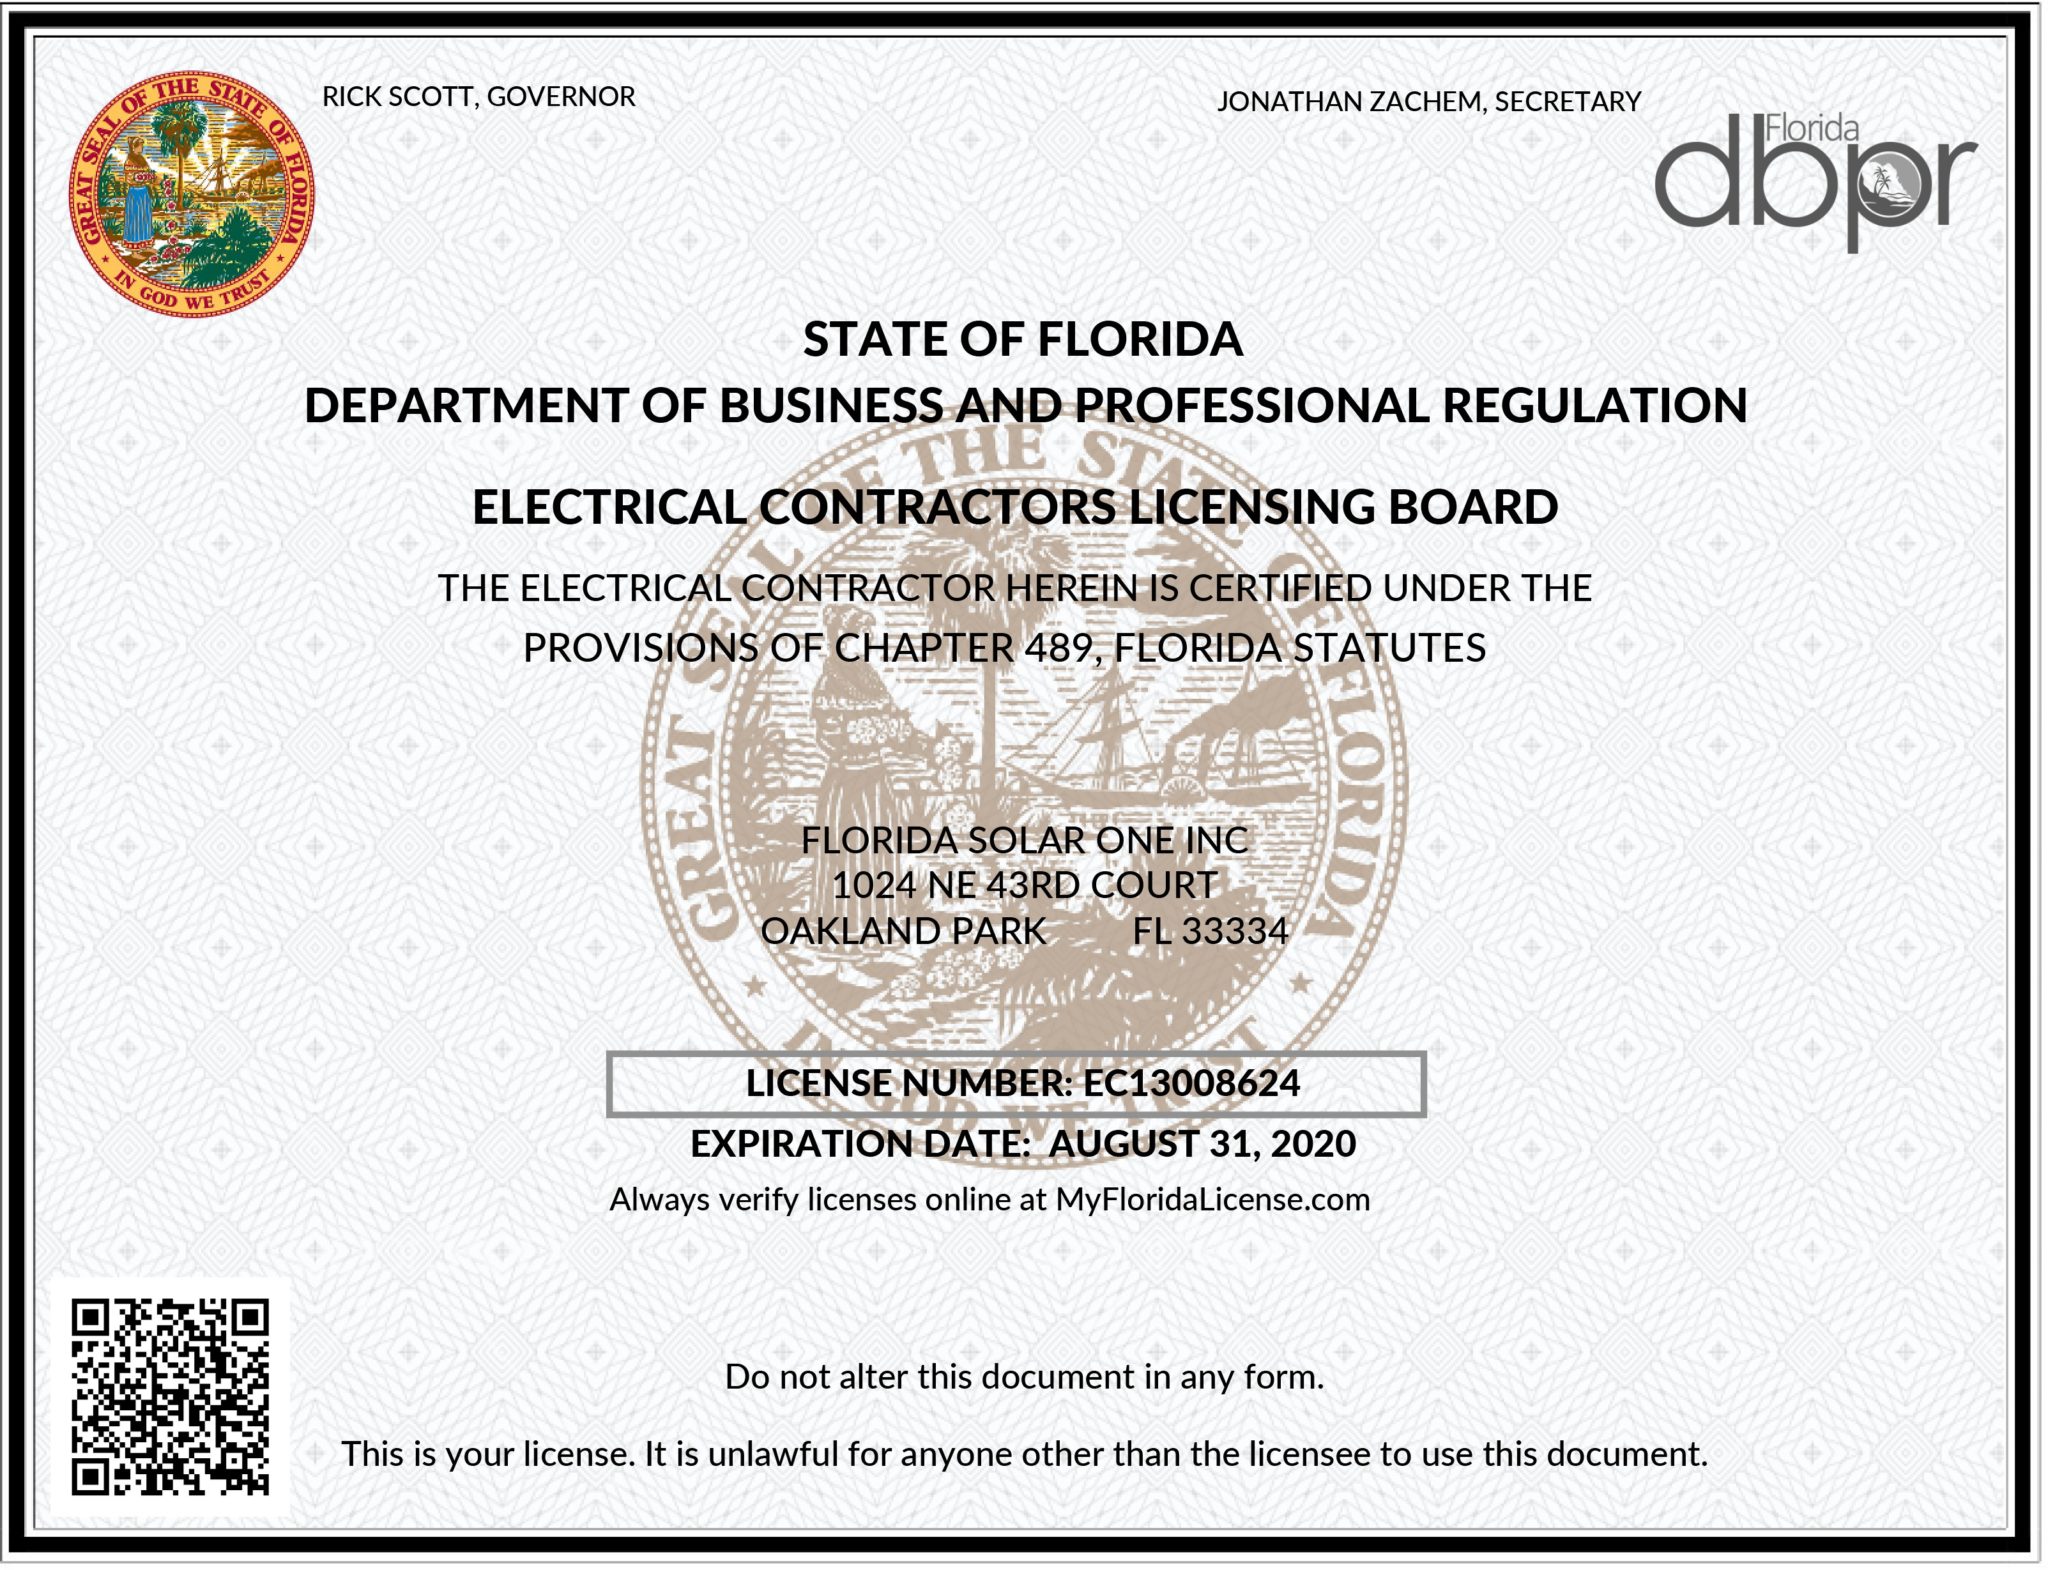 Florida Solar One Becomes An Unlimited Electrical Contractor